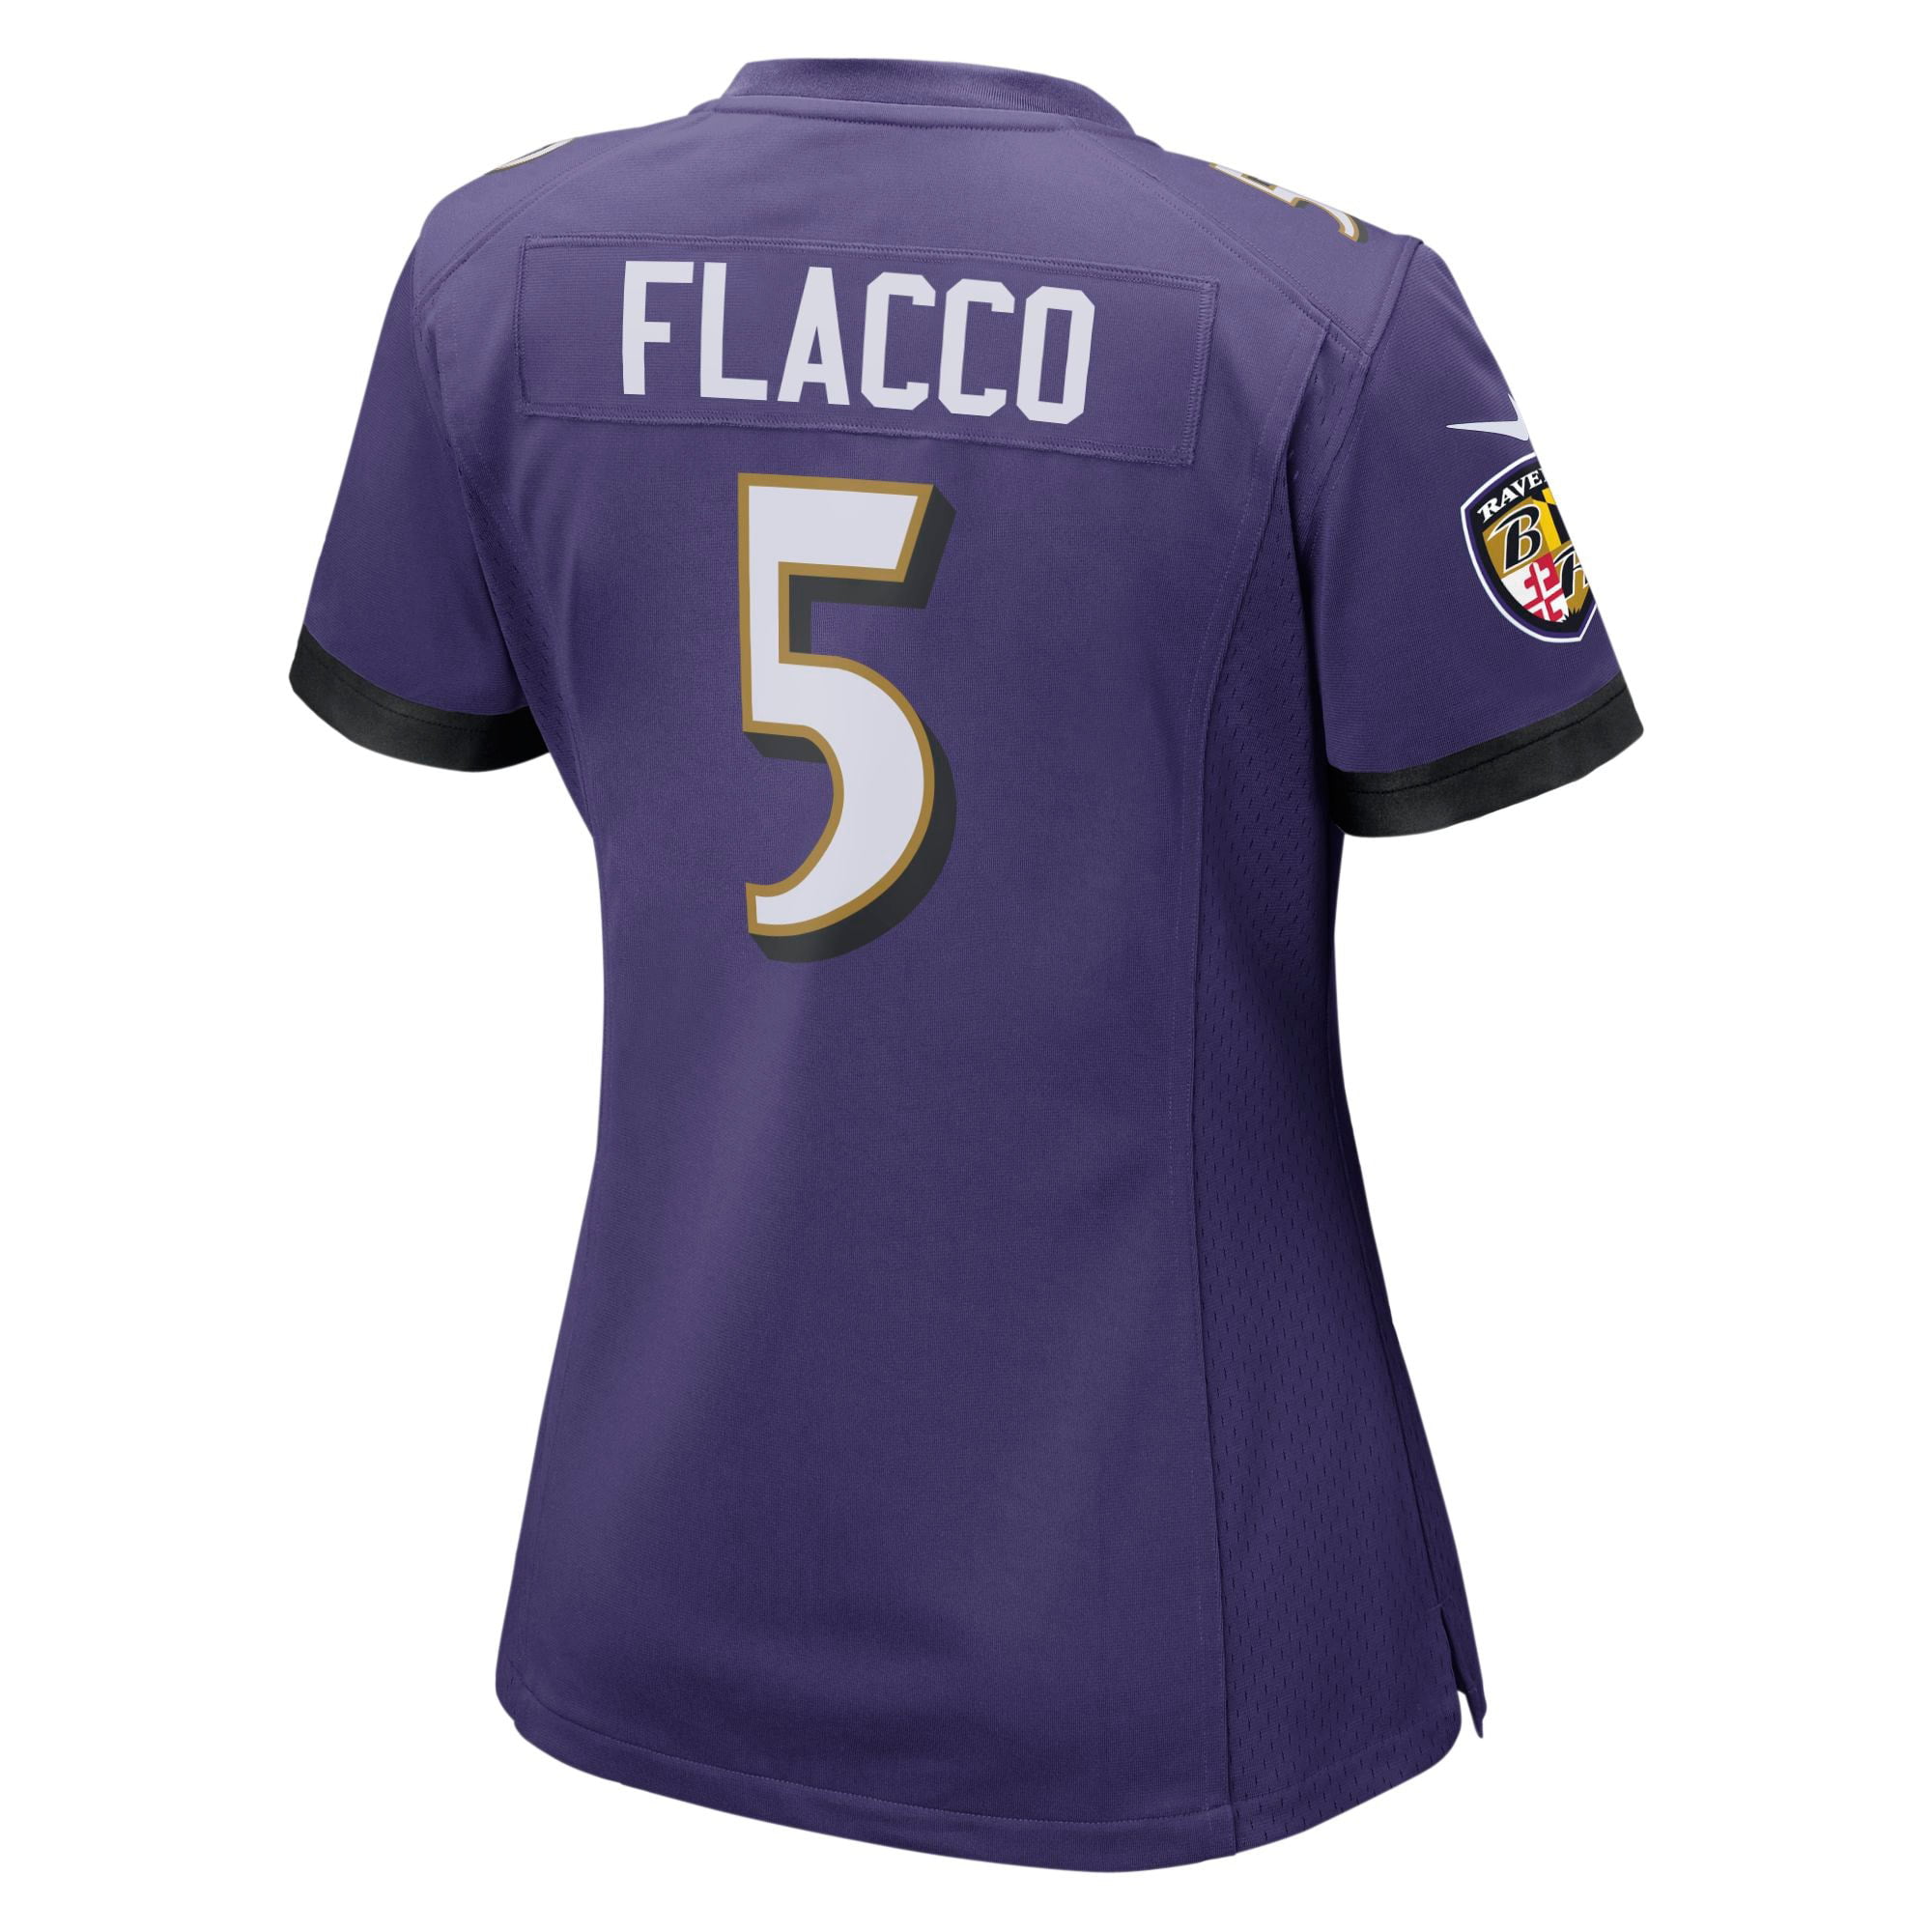 flacco youth jersey